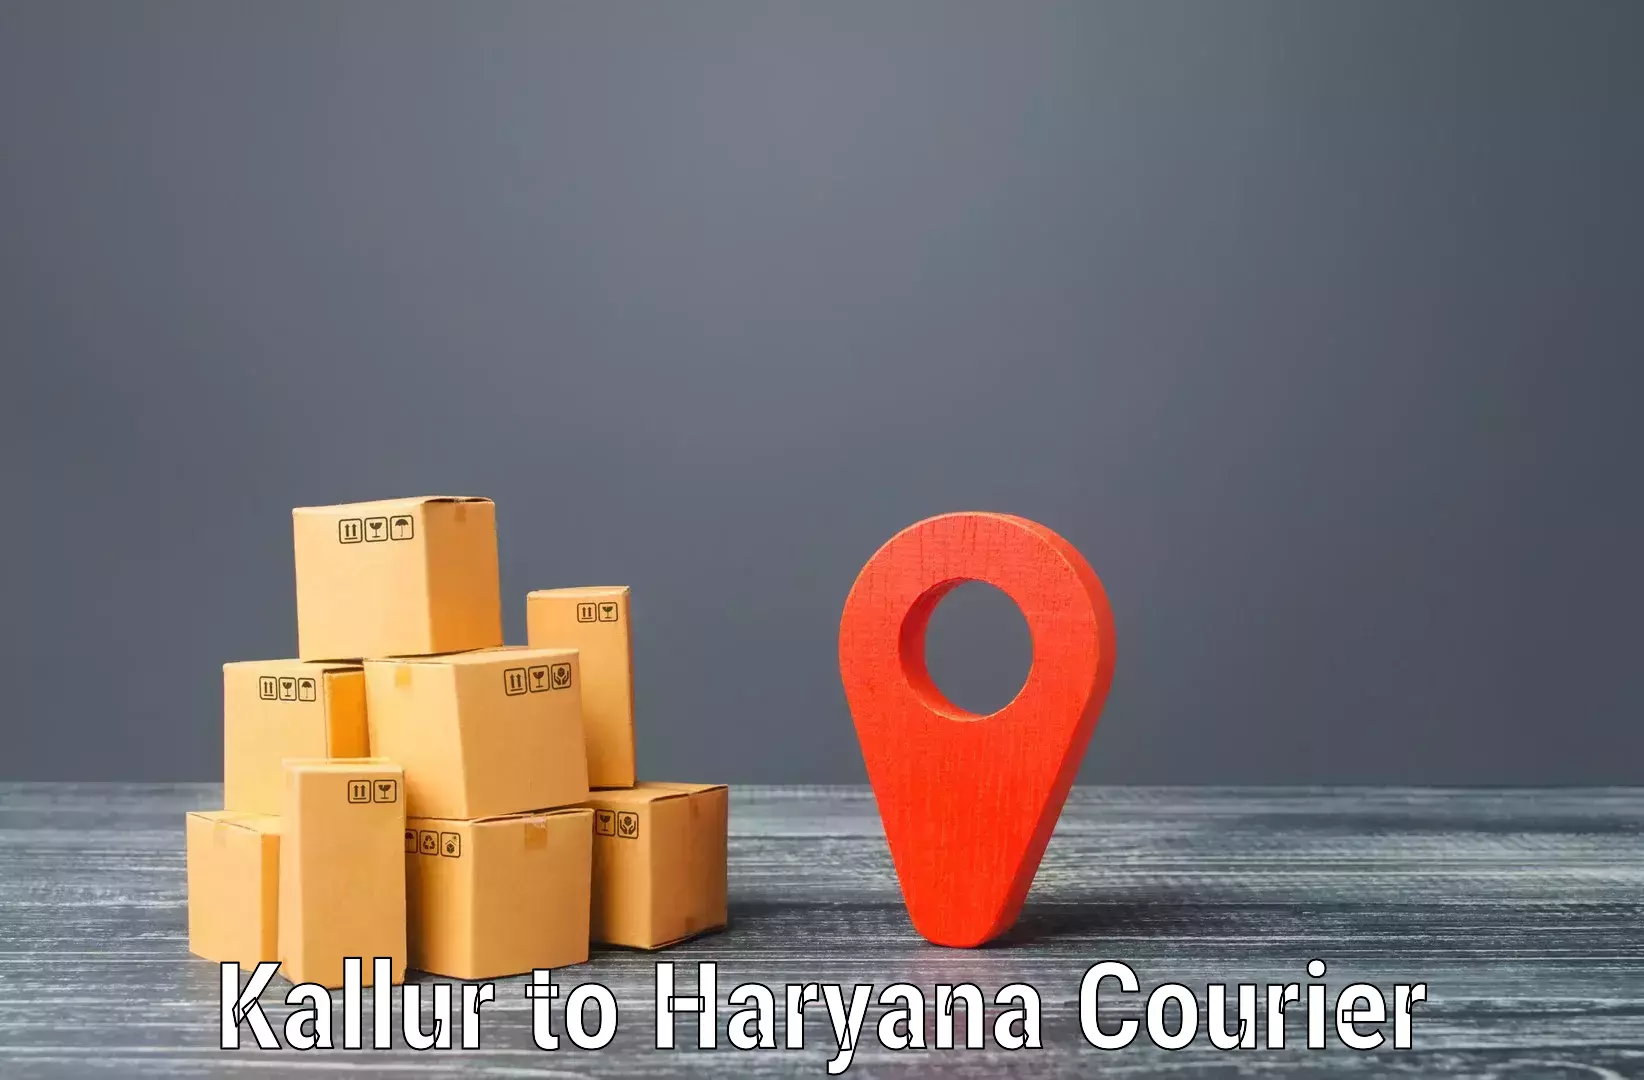 Round-the-clock parcel delivery in Kallur to NCR Haryana